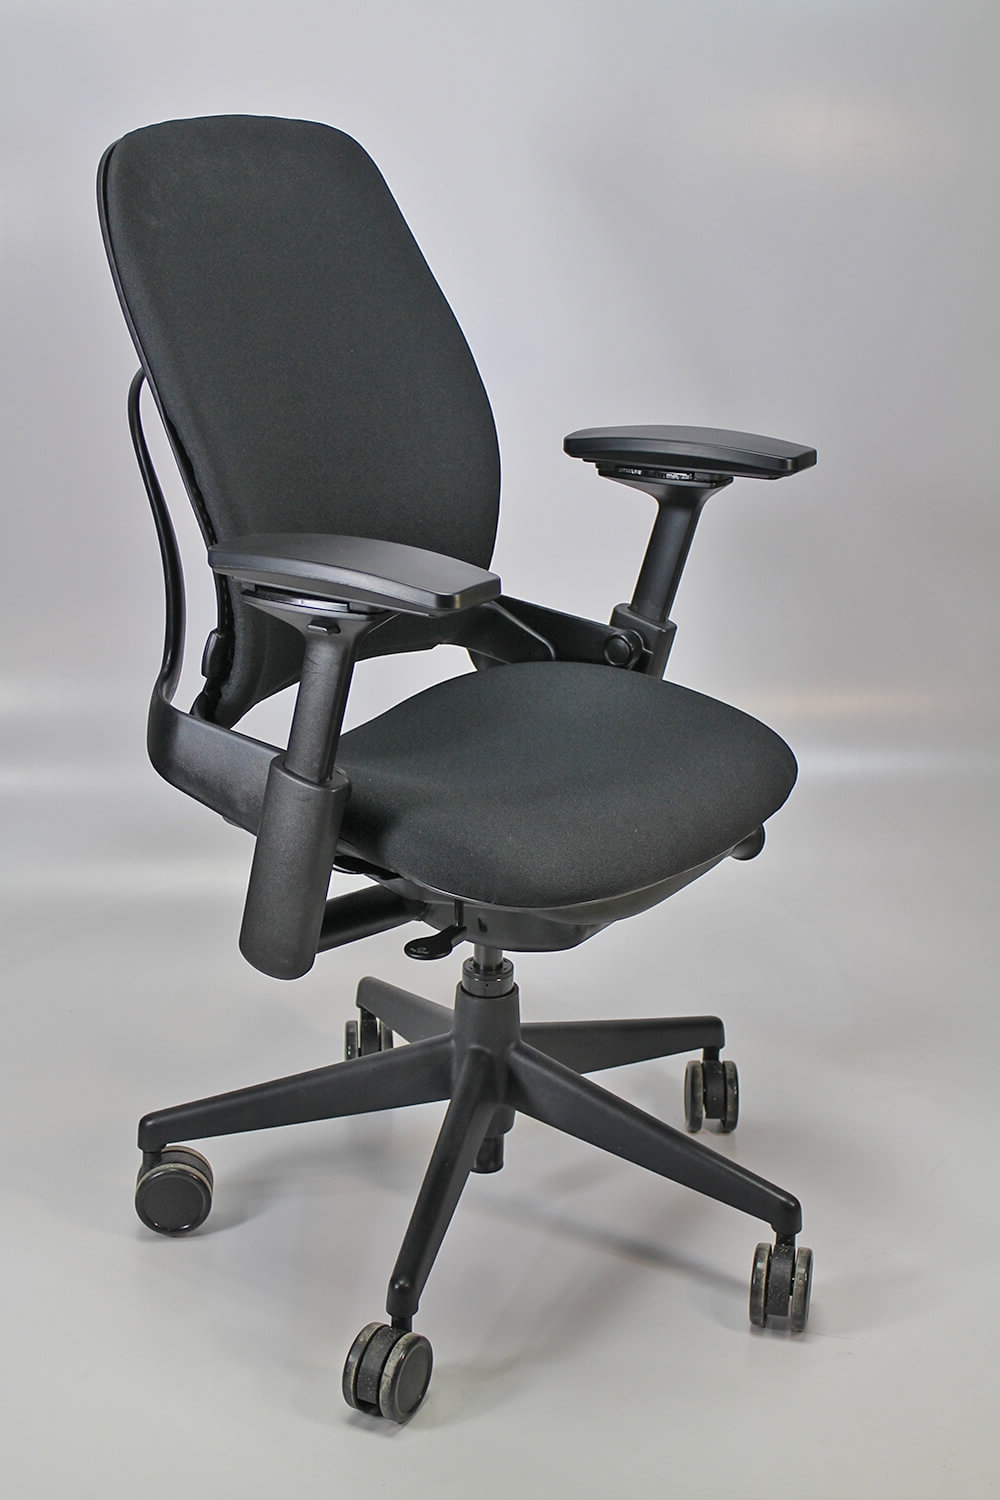 steelcase-chairs-steelcase-leap-v2.jpg